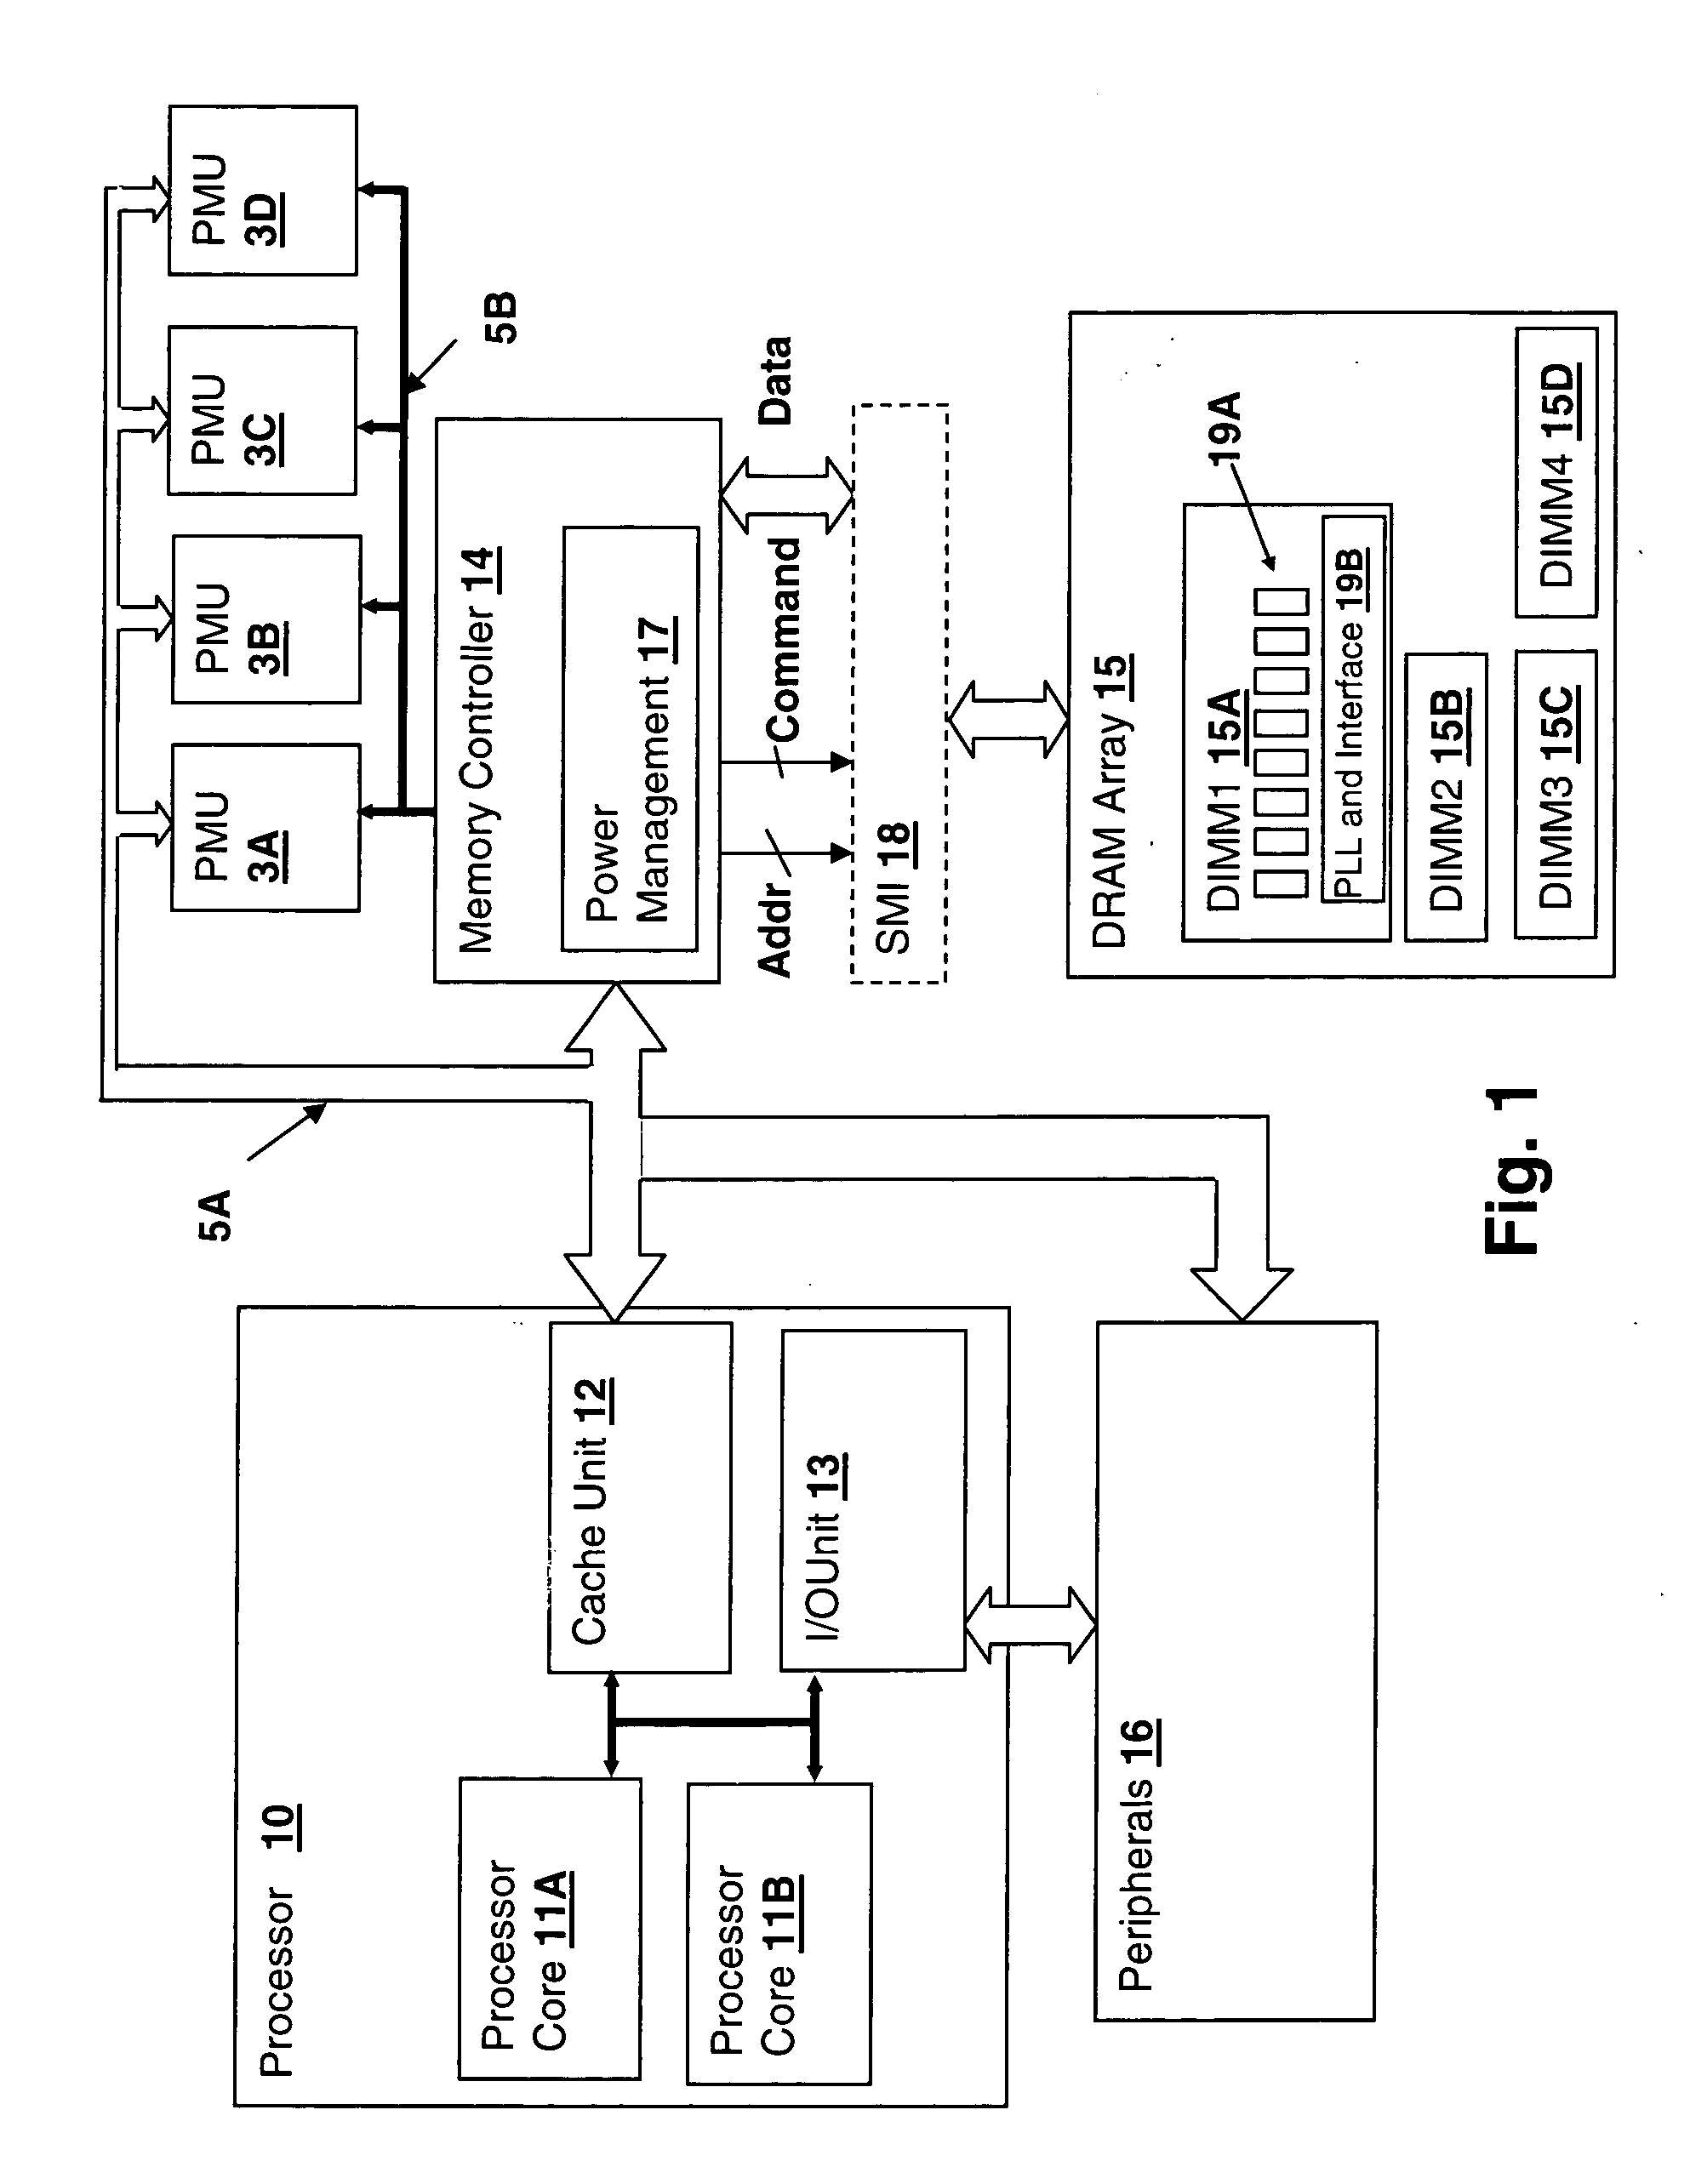 Method and system for energy management in a simultaneous multi-threaded (SMT) processing system including per-thread device usage monitoring